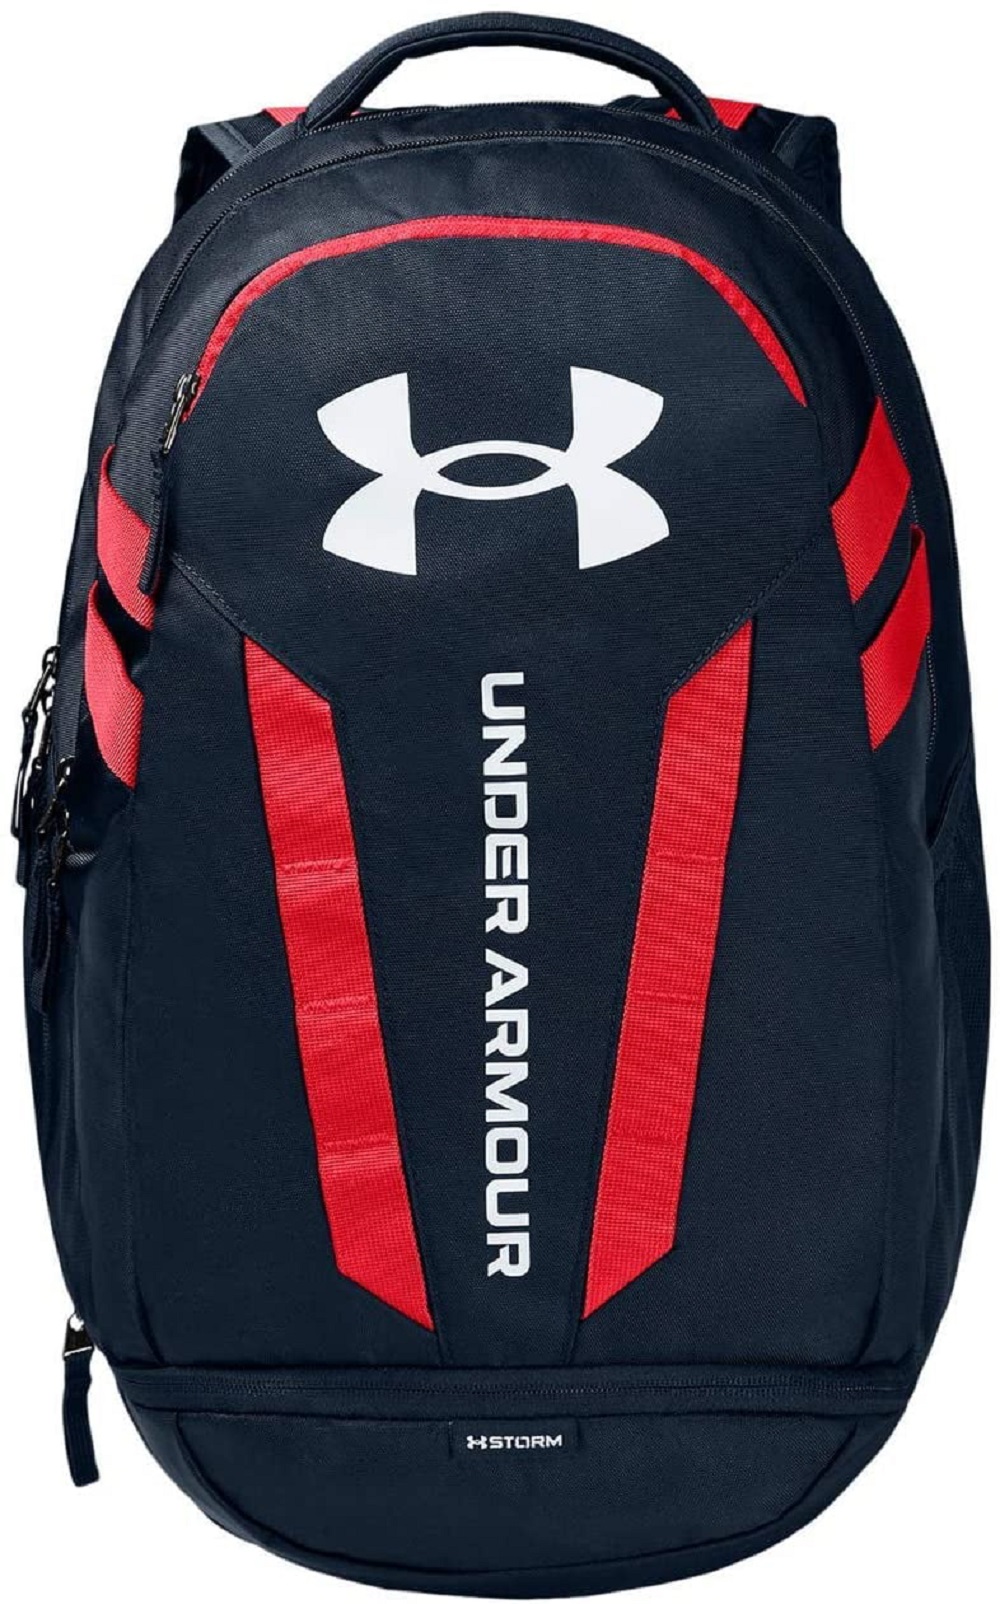 Under Armour 1361176-409 Hustle Backpack, Academy Blue One Size - image 1 of 3